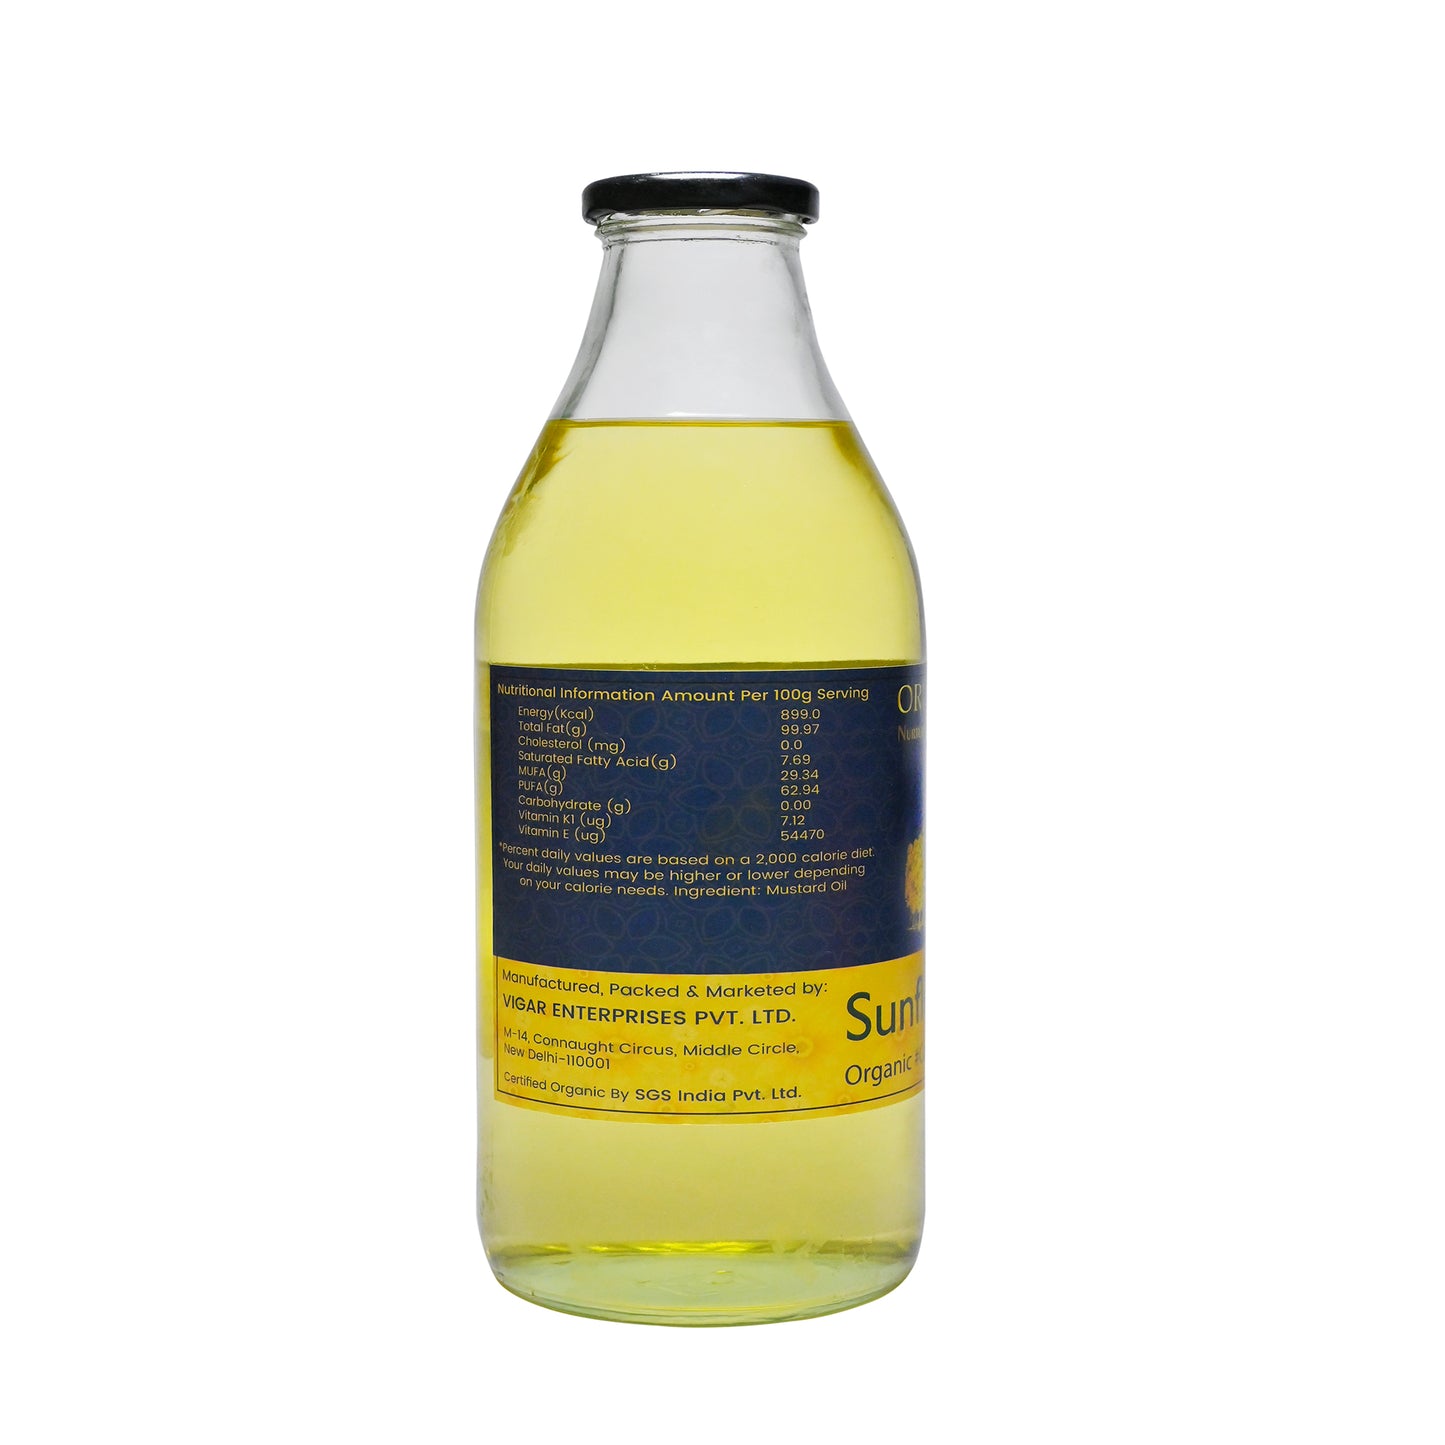 Organic Soul - Organic Cold Pressed Sunflower Oil, 1L | Kolhu/Chekku, Chemical-Free | Wood Pressed for Cooking